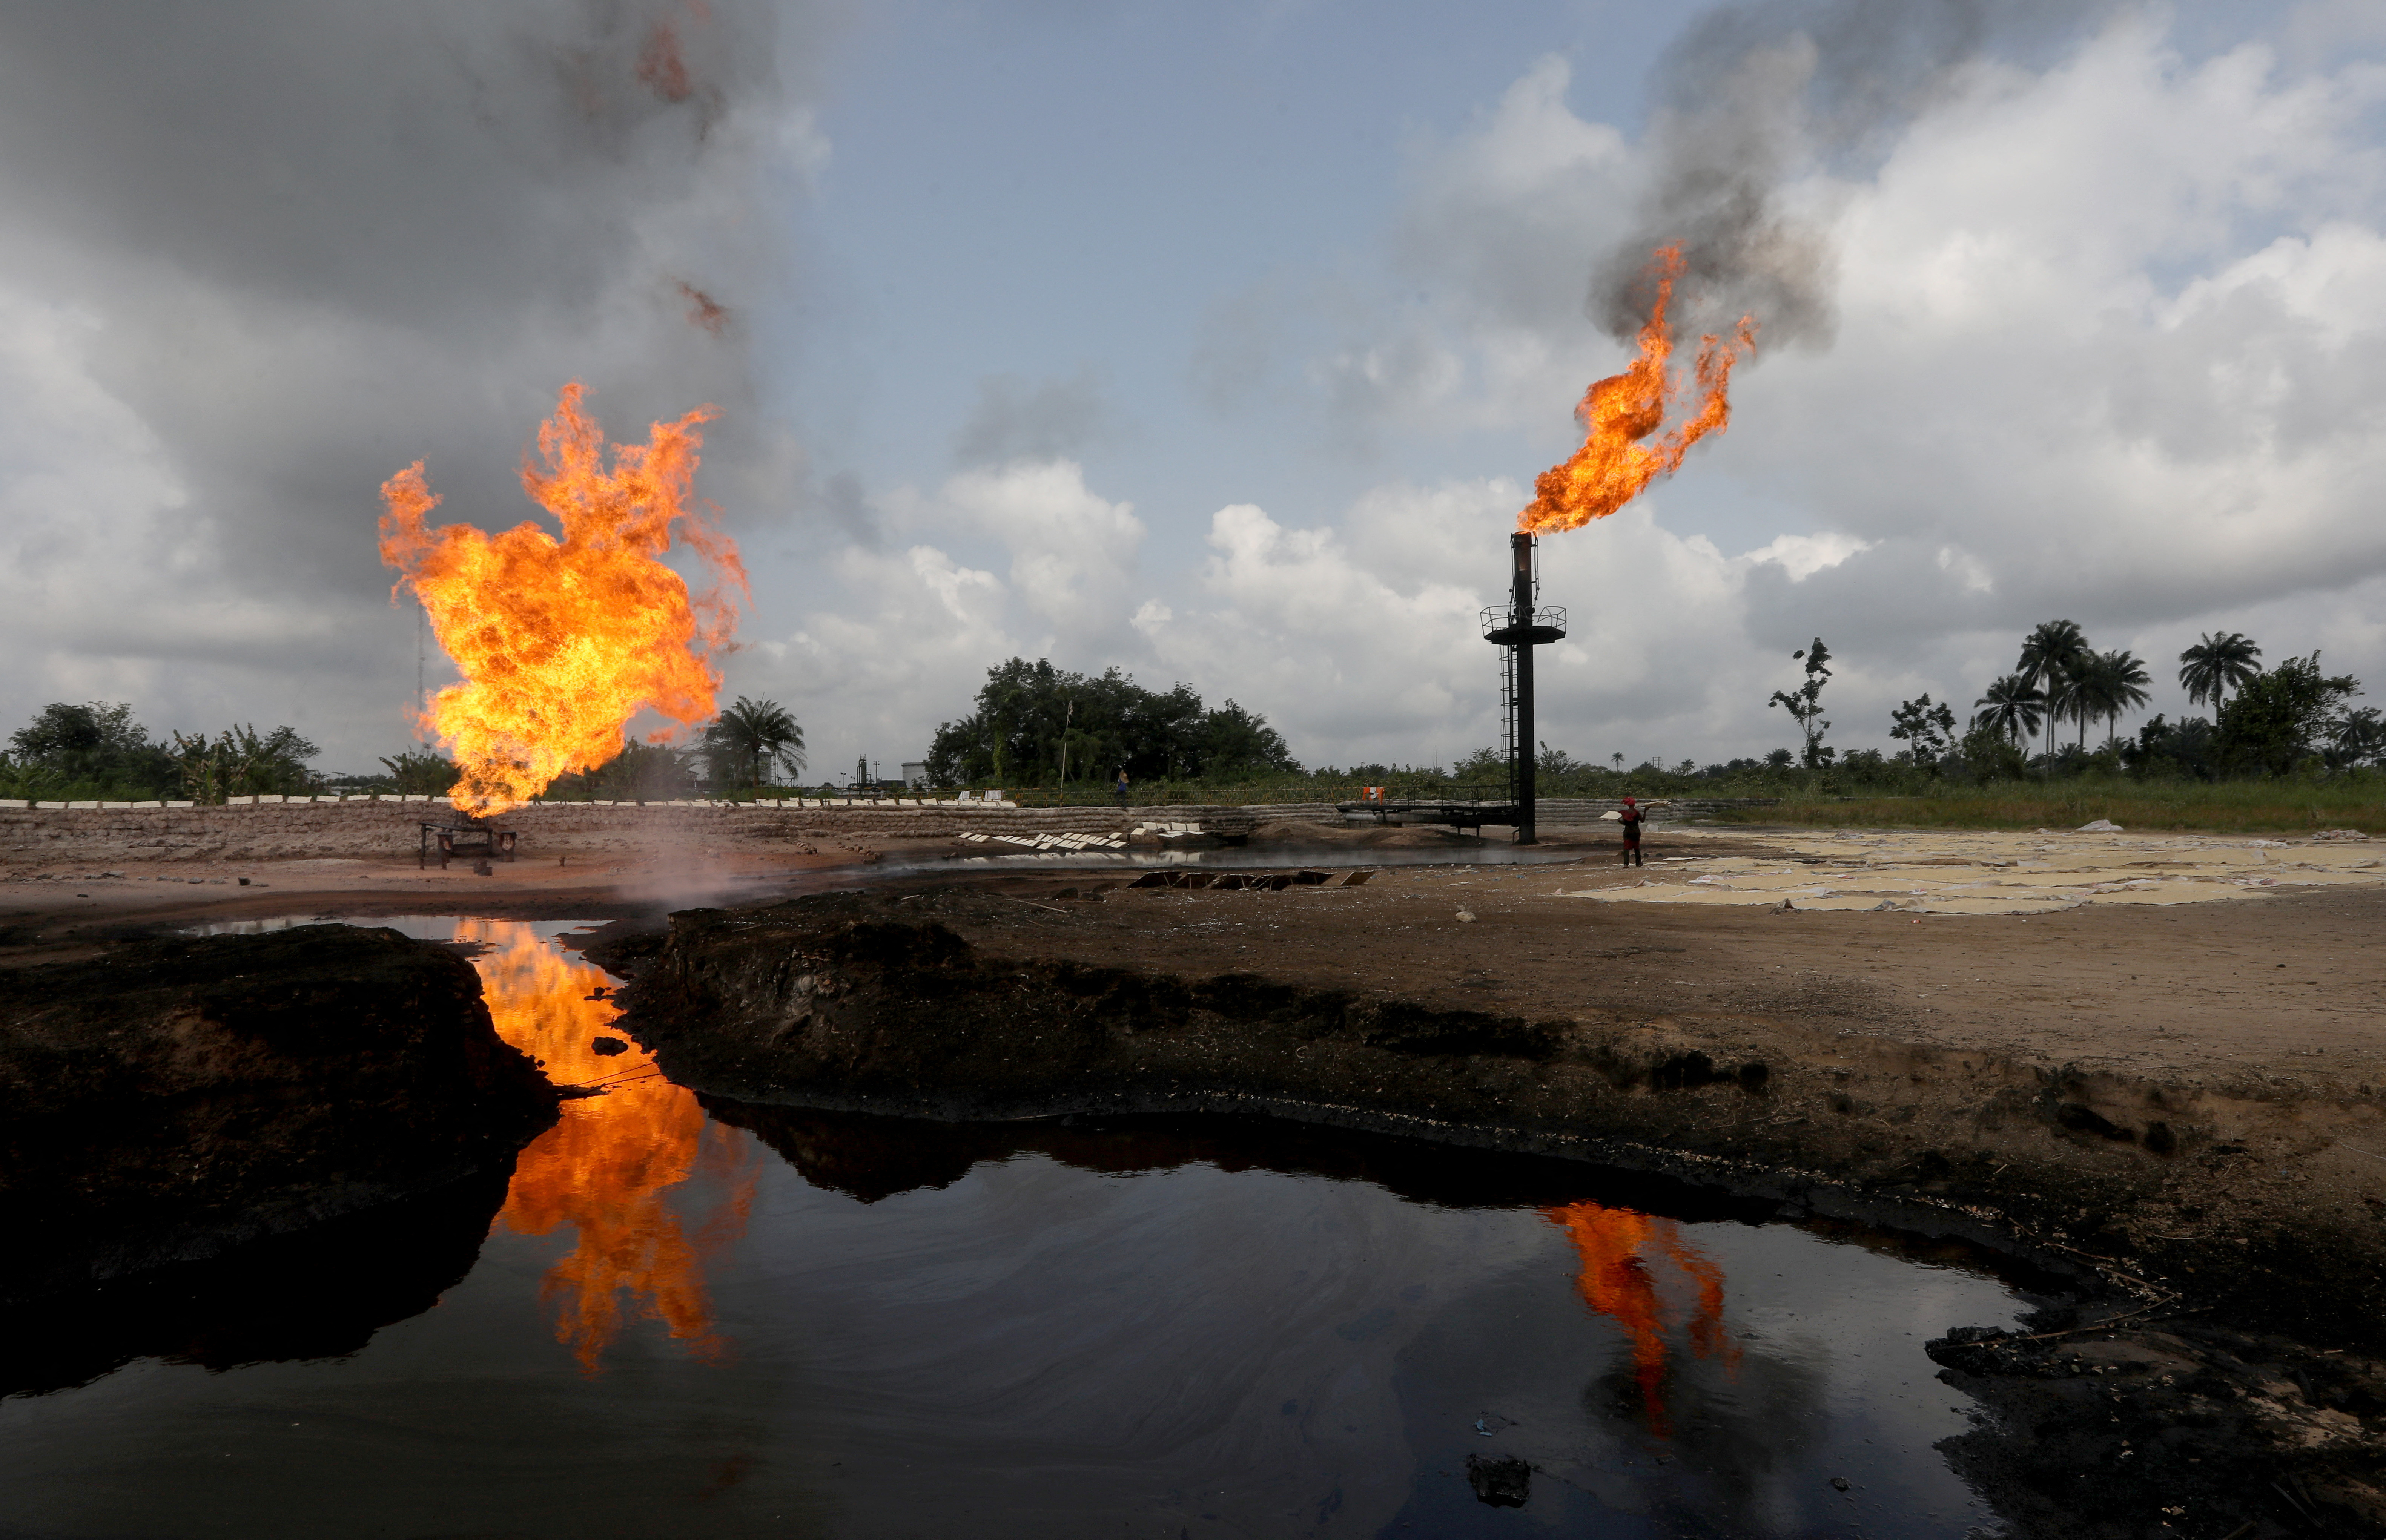 A reflection of two gas flaring furnaces is seen in the pool of oil-smeared water at a flow station in Ughelli, Delta State